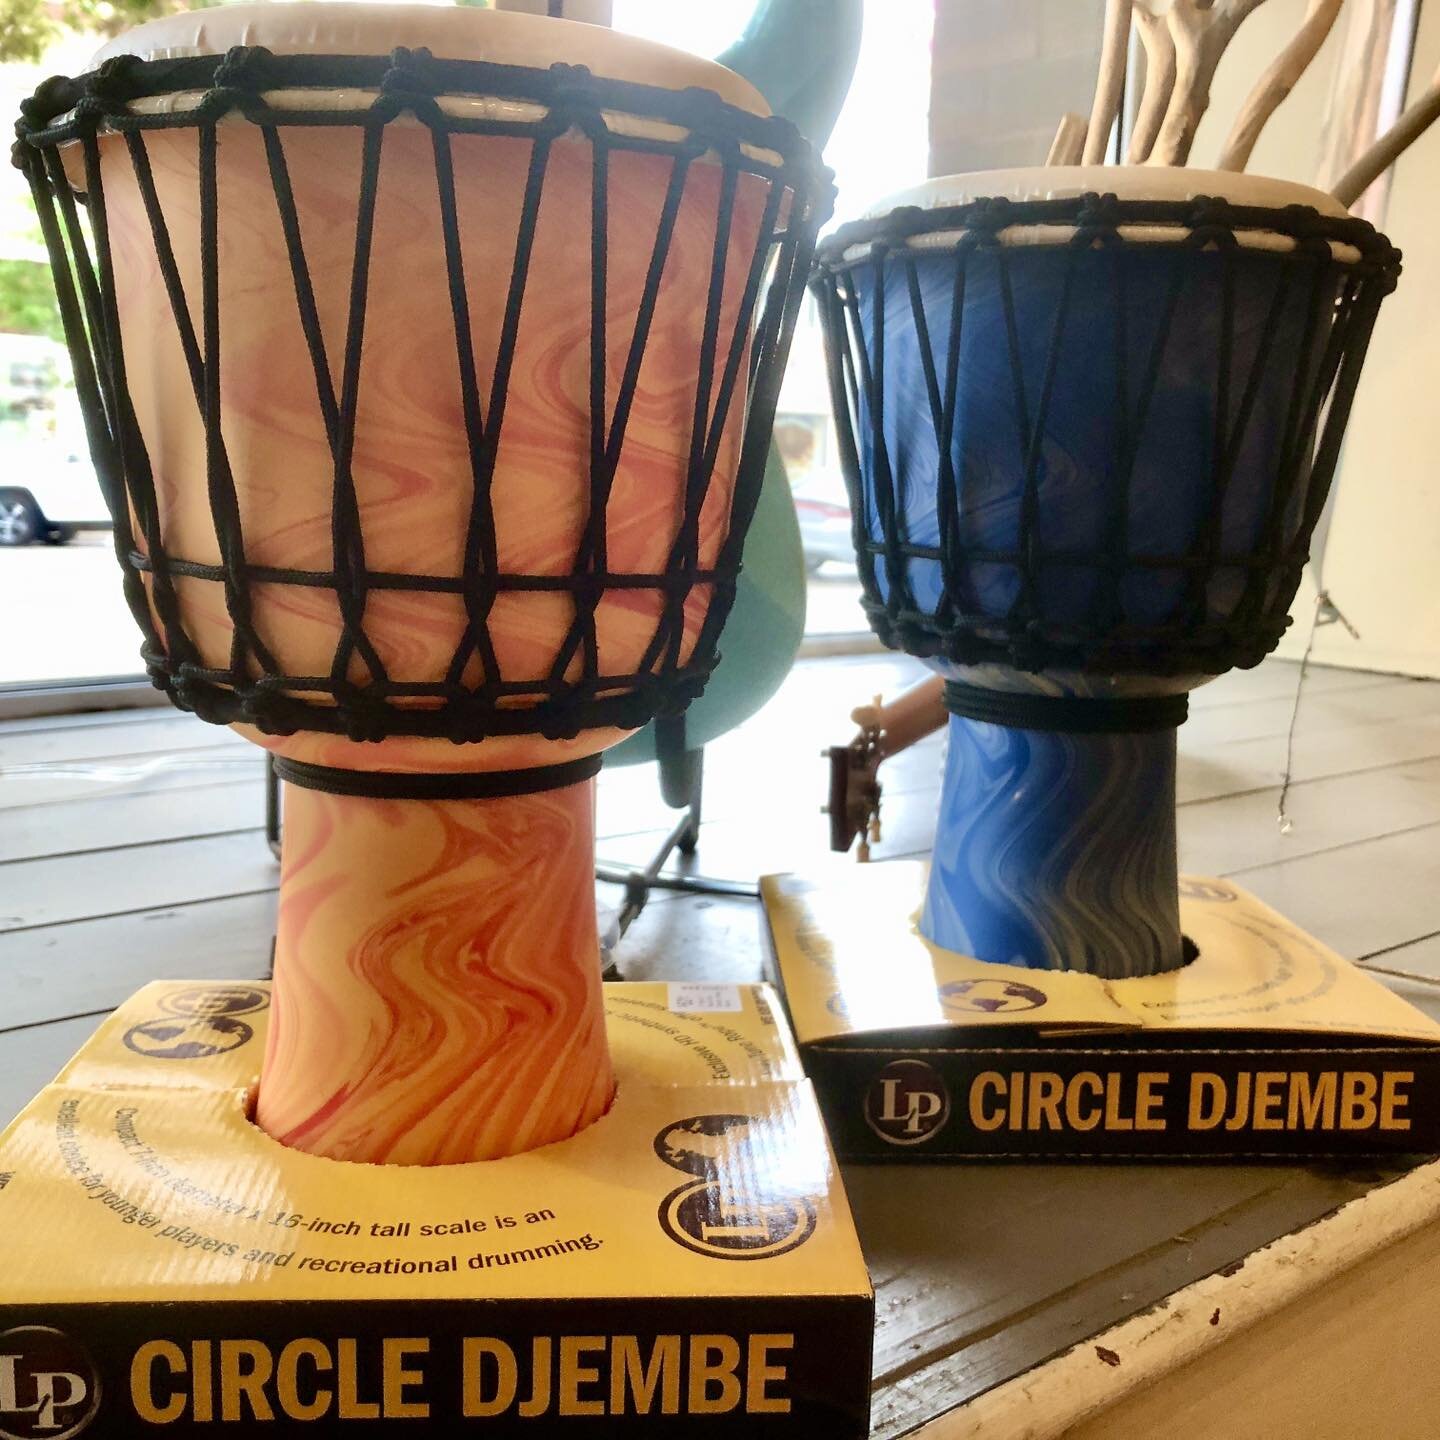 It&rsquo;s drum circle season! The World 7-inch Rope Circle Djembe from Latin Percussion is a wonderful percussion instrument that features stage-ready design and incredible tone. This lightweight djembe is made from LP's exclusive HD material, makin